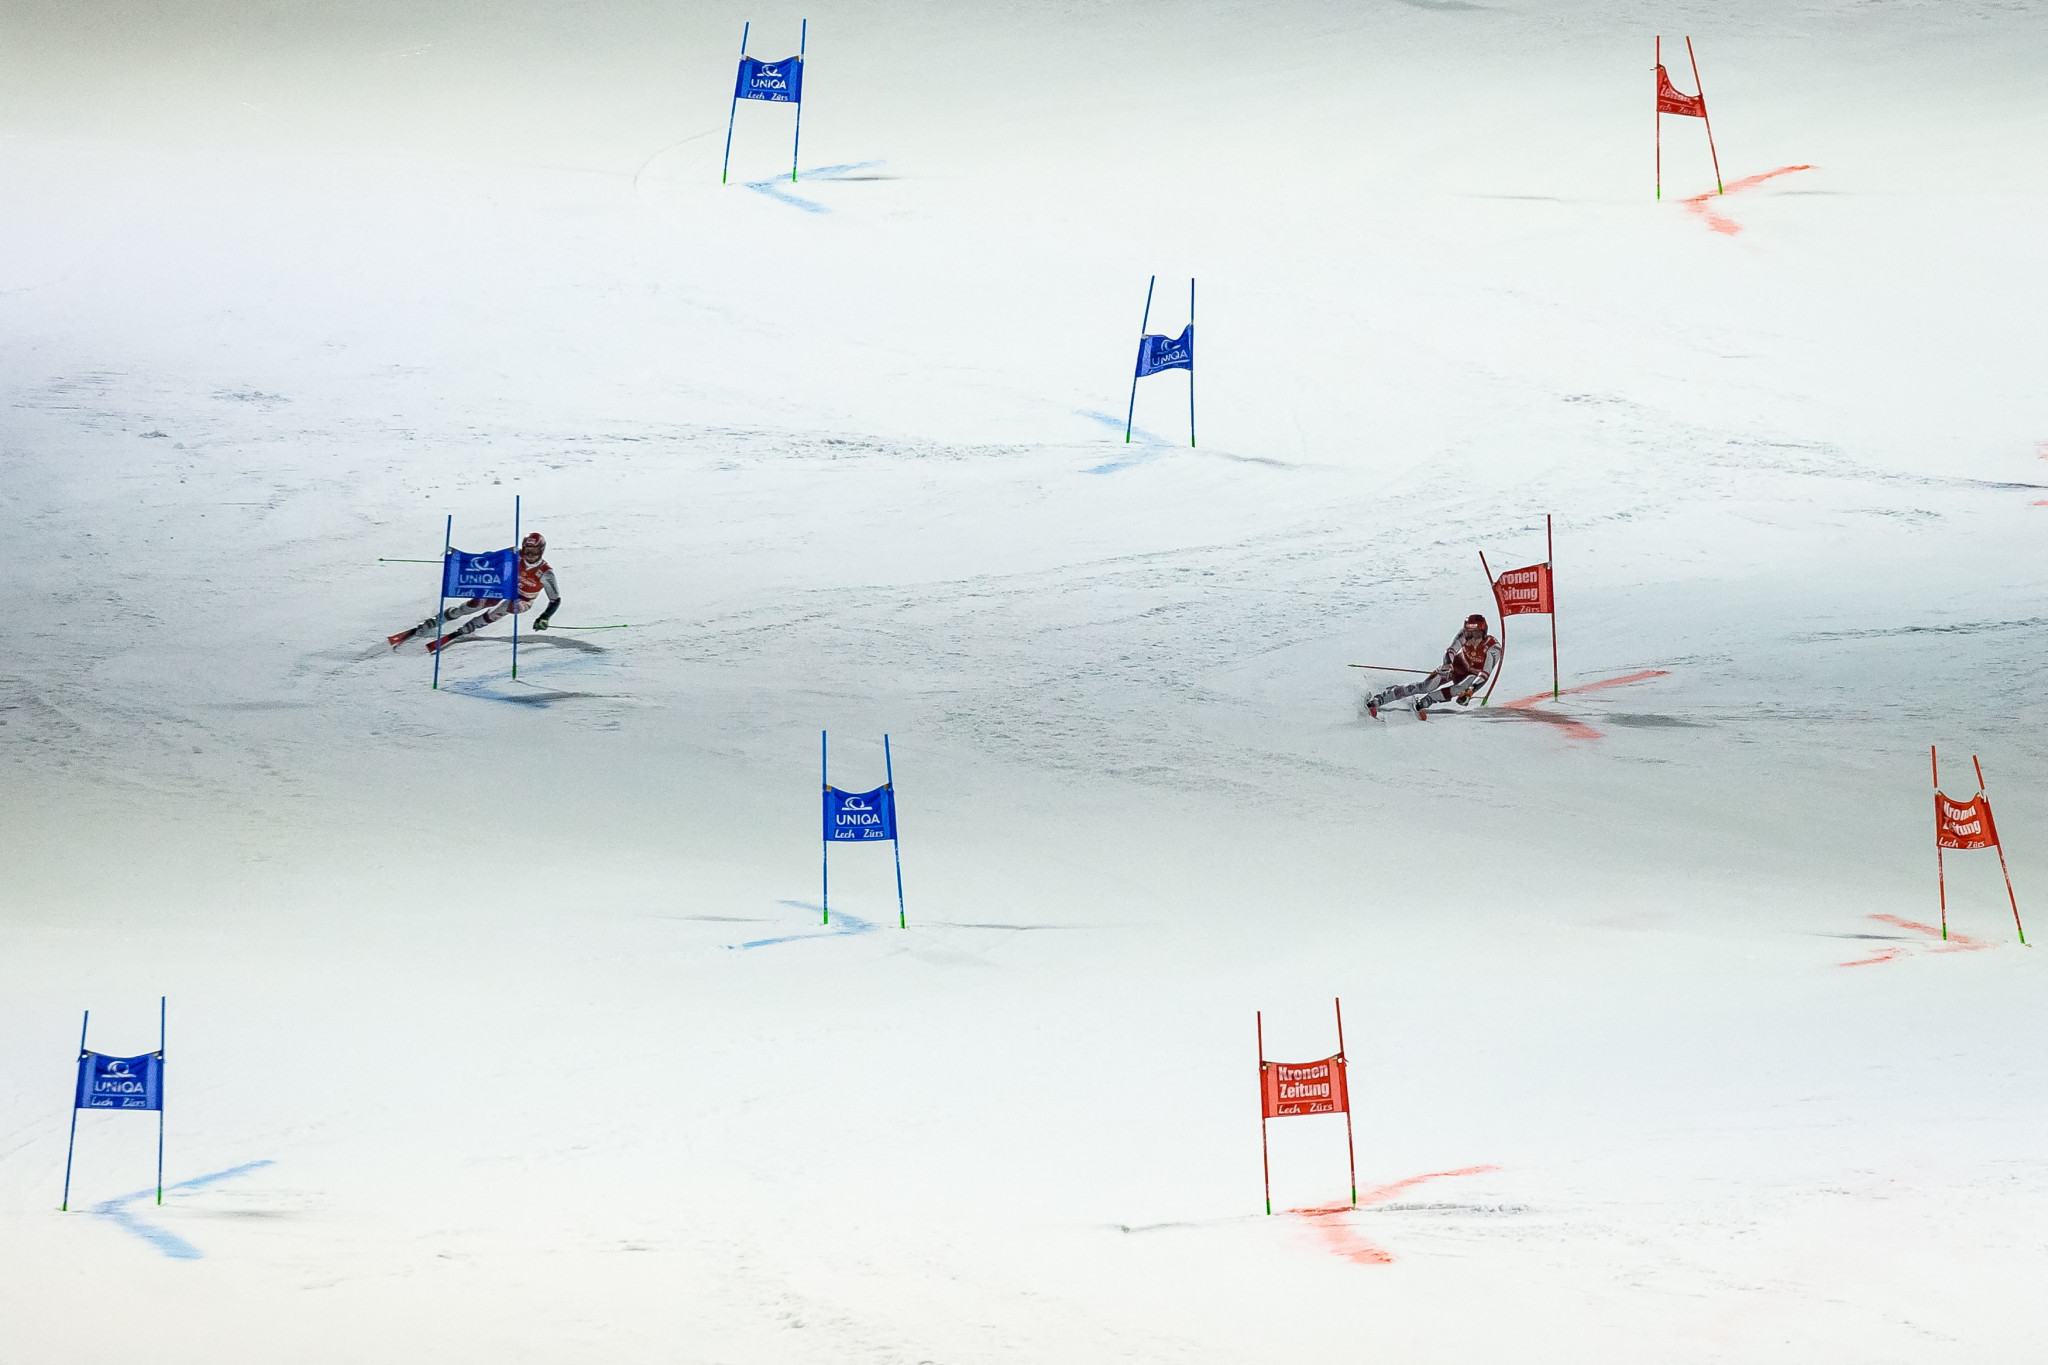 More Alpine Ski World Cup races cancelled because of warm weather